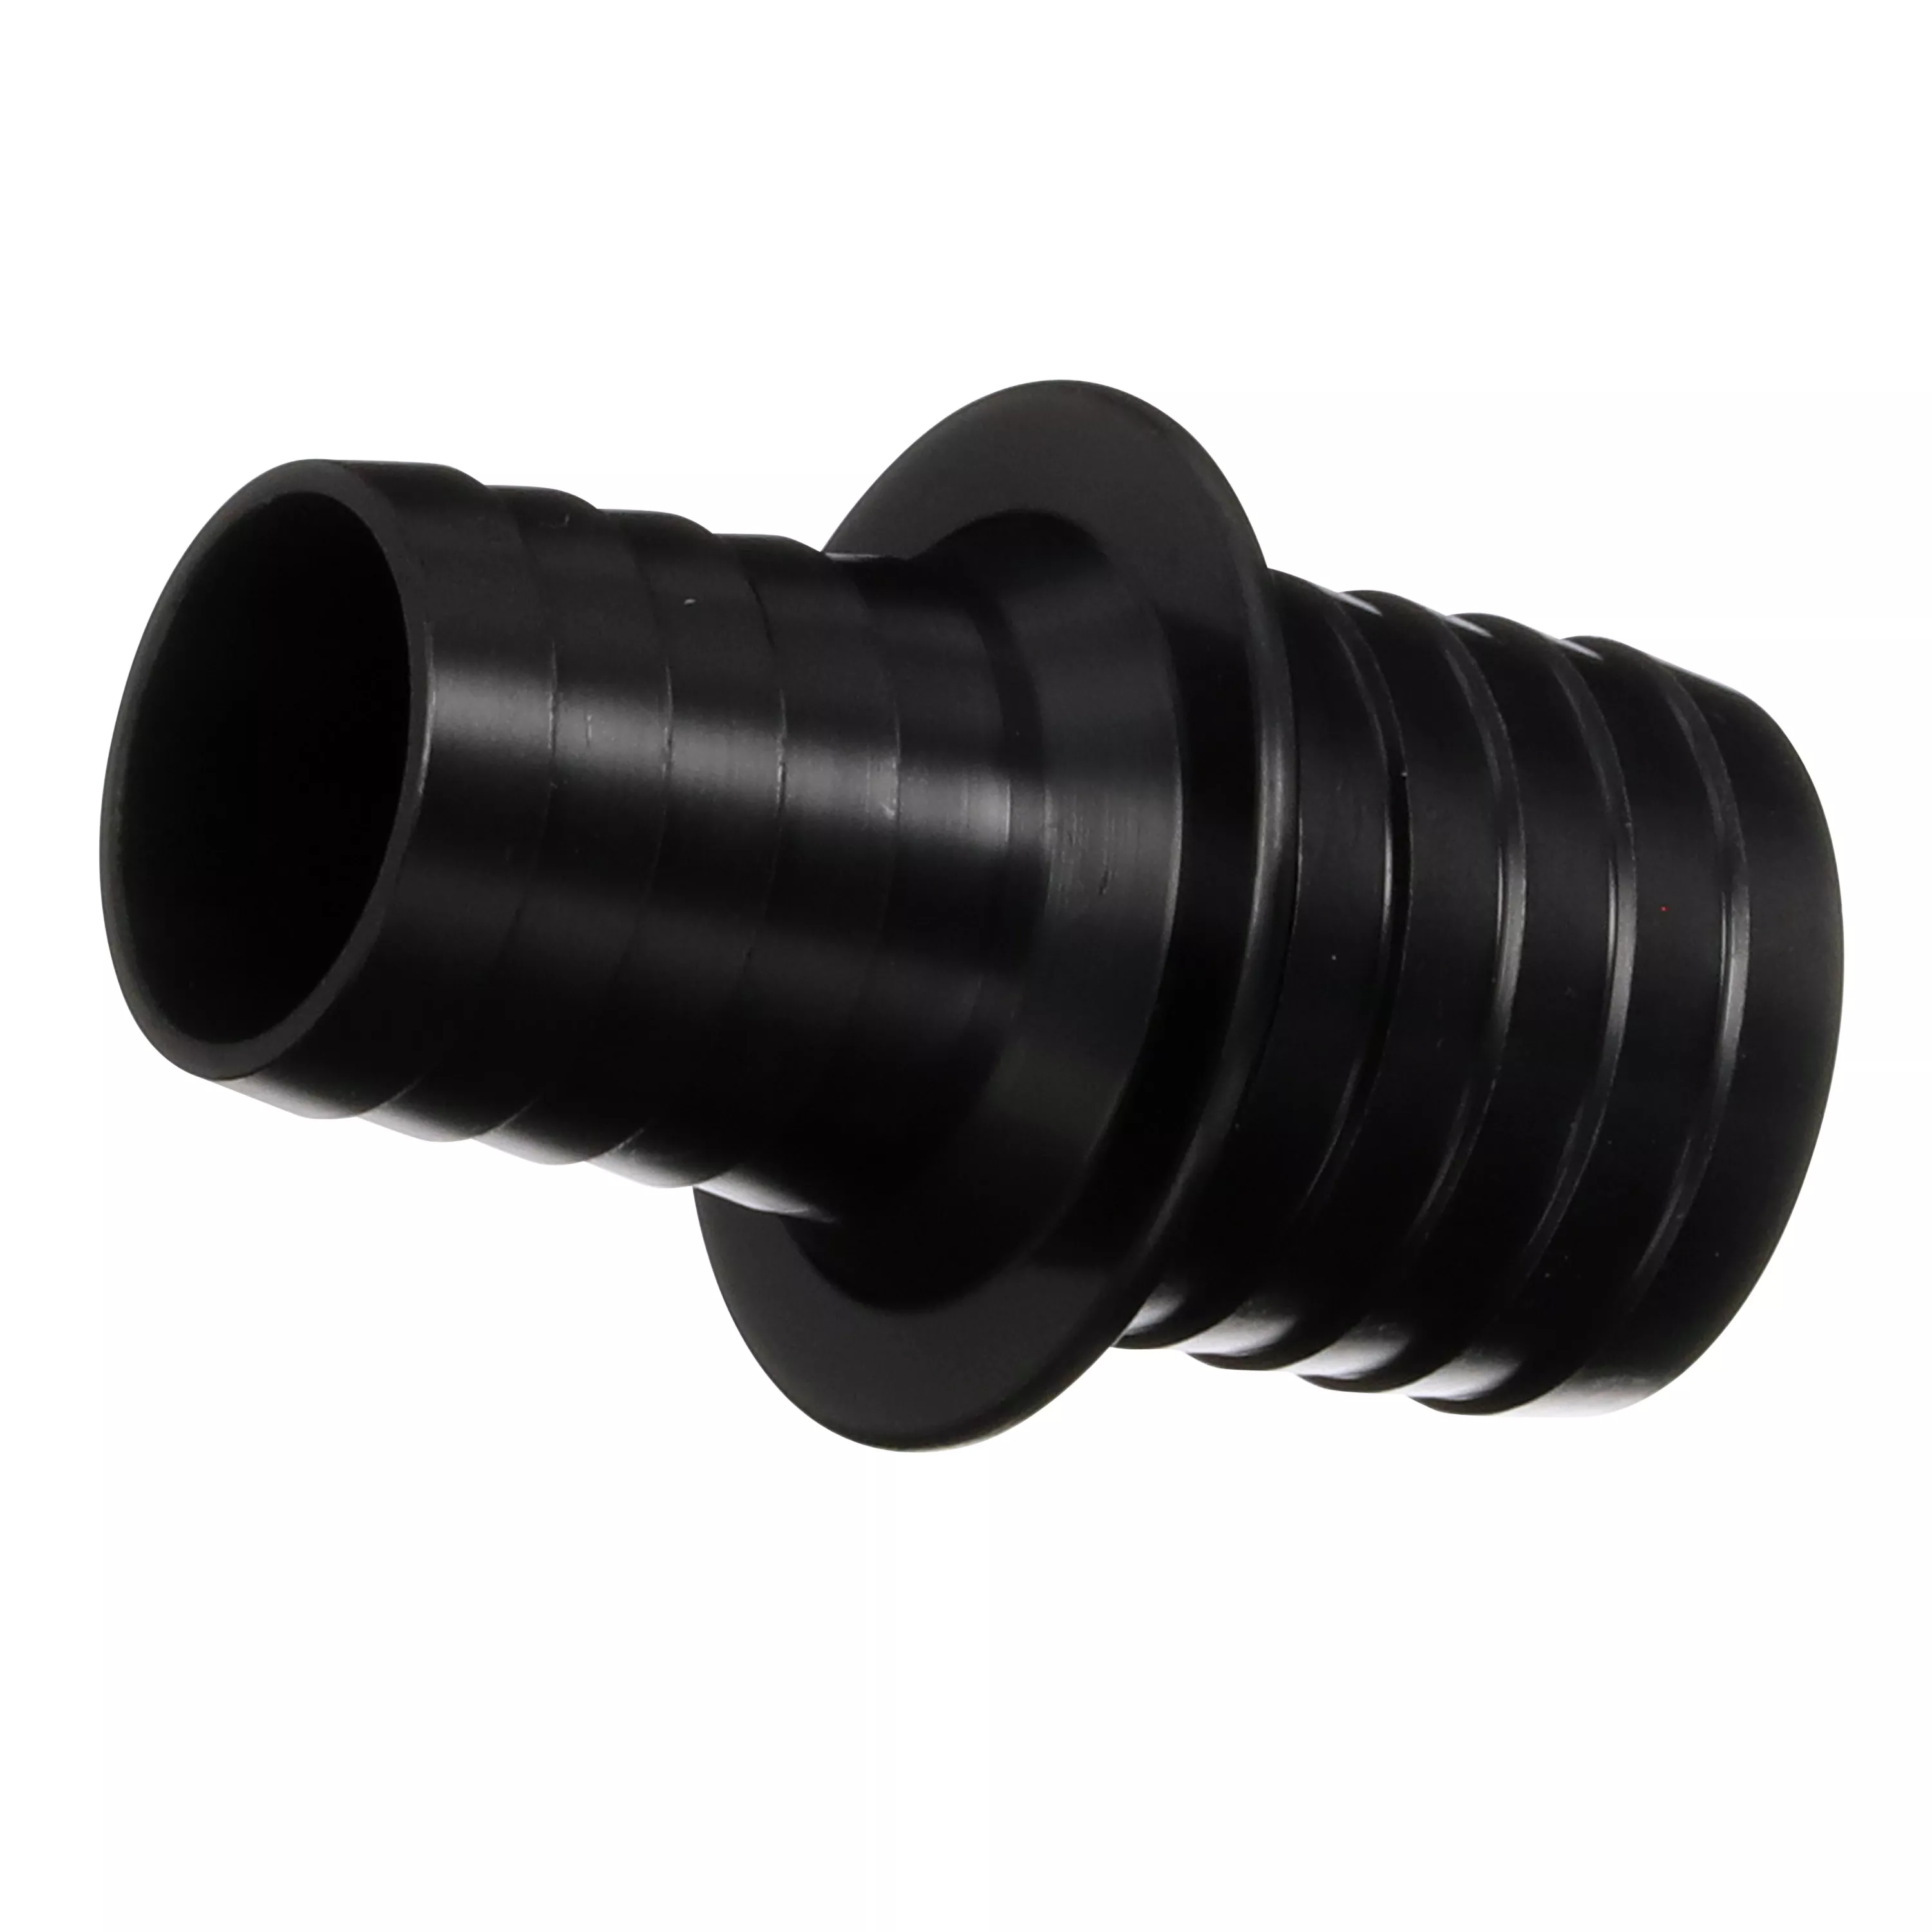 3M™ Vacuum Hose Adapter 30441, 1 in ID to 1-1/4 in ID